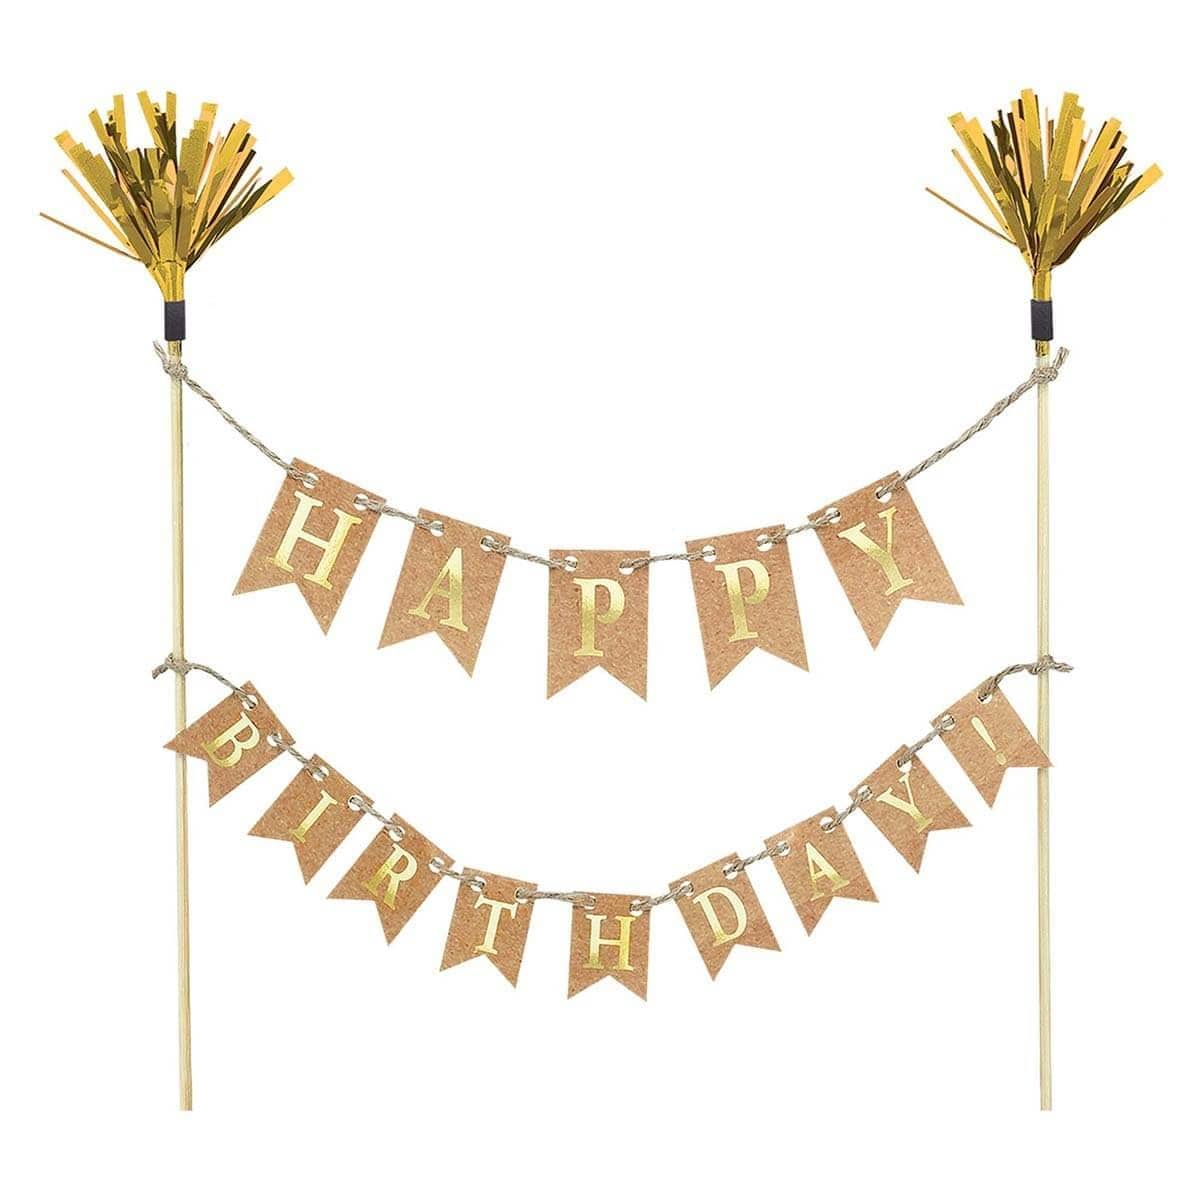 Buy Cake Supplies Cake Picks Happy Birthday - Gold sold at Party Expert